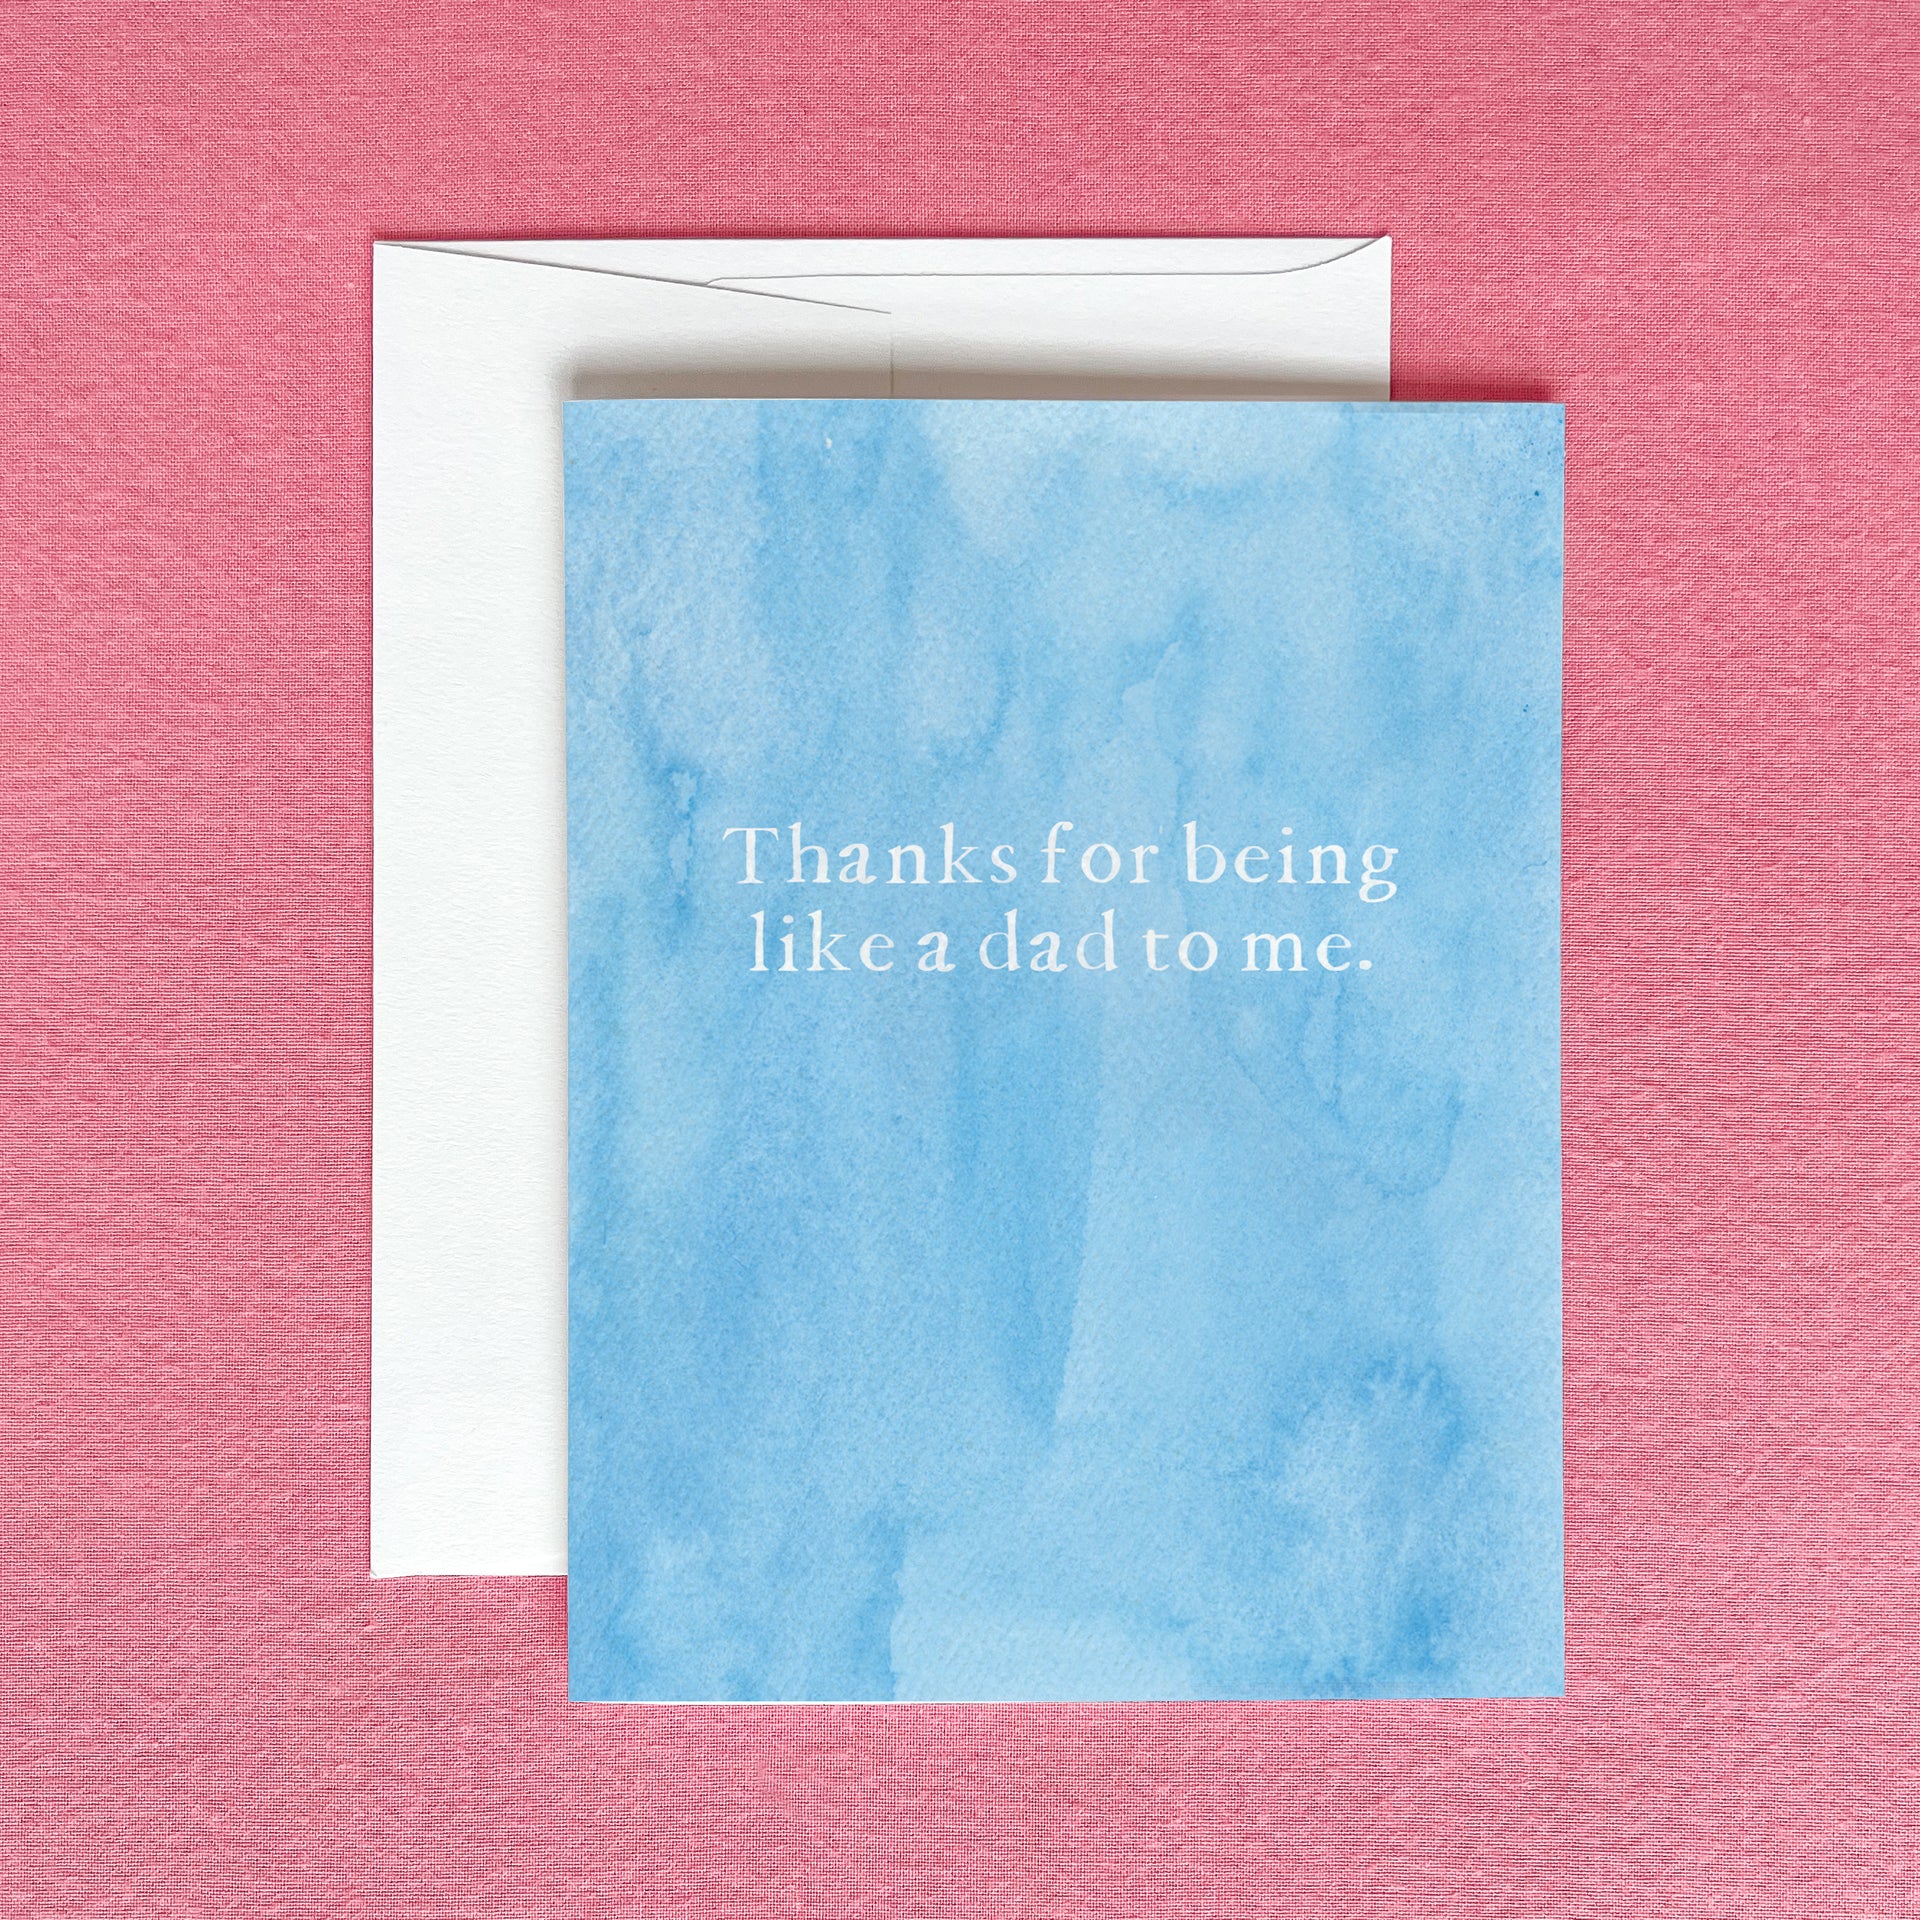 Thanks for Being Like a Dad to Me Greeting Card by Gert & Co